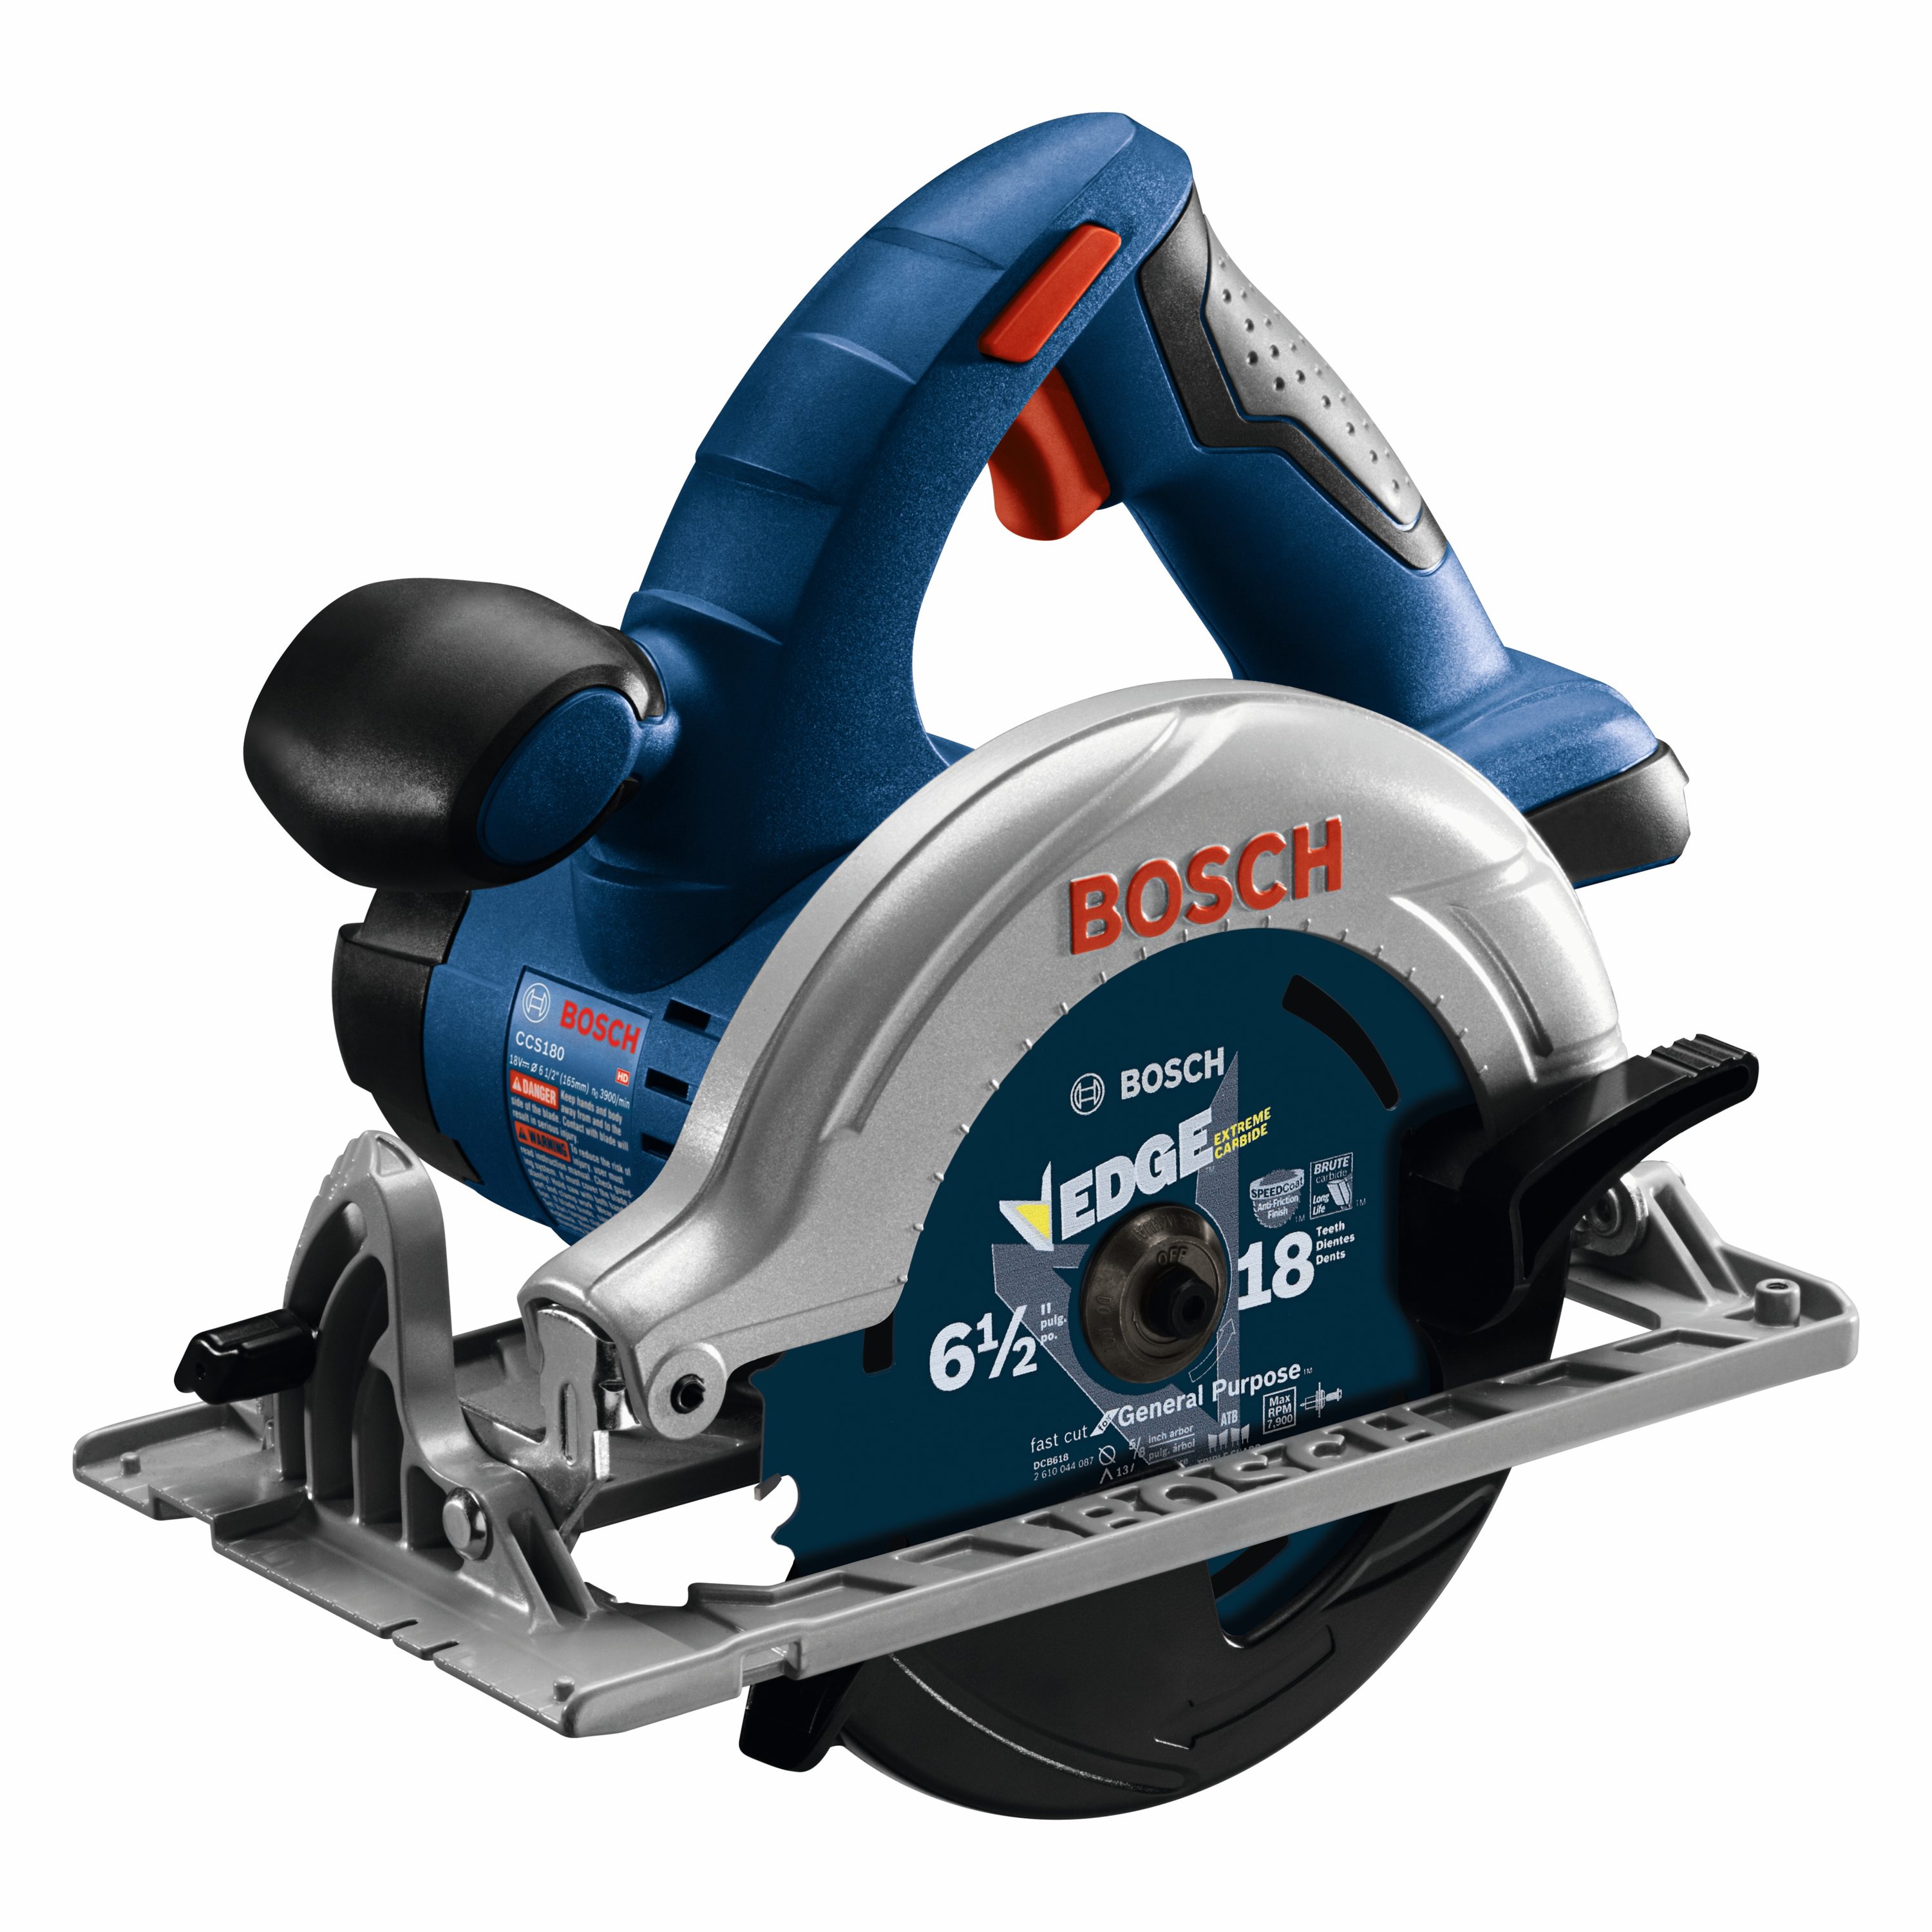 Bosch 18-volt 6-1/2-in Cordless Circular Saw $99 + Free Bosch Core18V 4 Amp-Hour Lithium Battery at Lowes YMMV